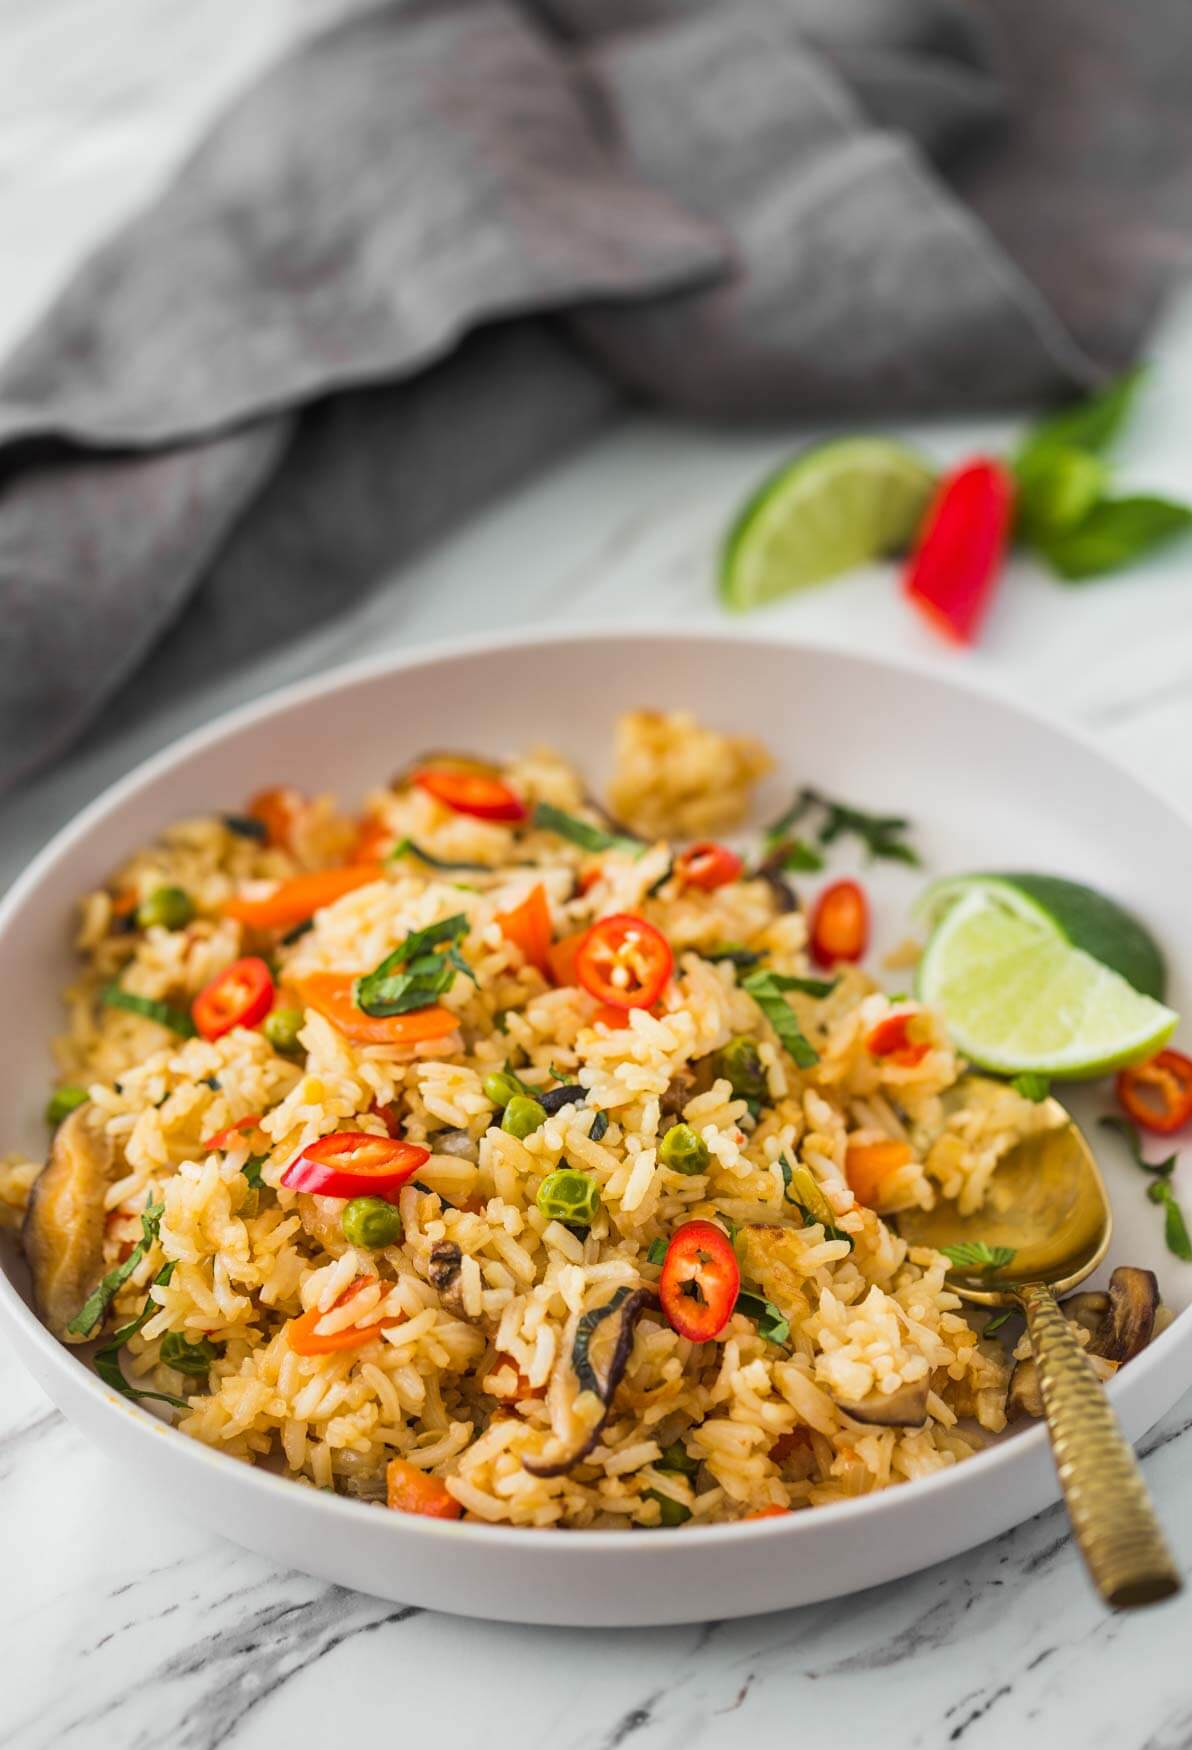 Thai fried rice with vegetables in a serving plate